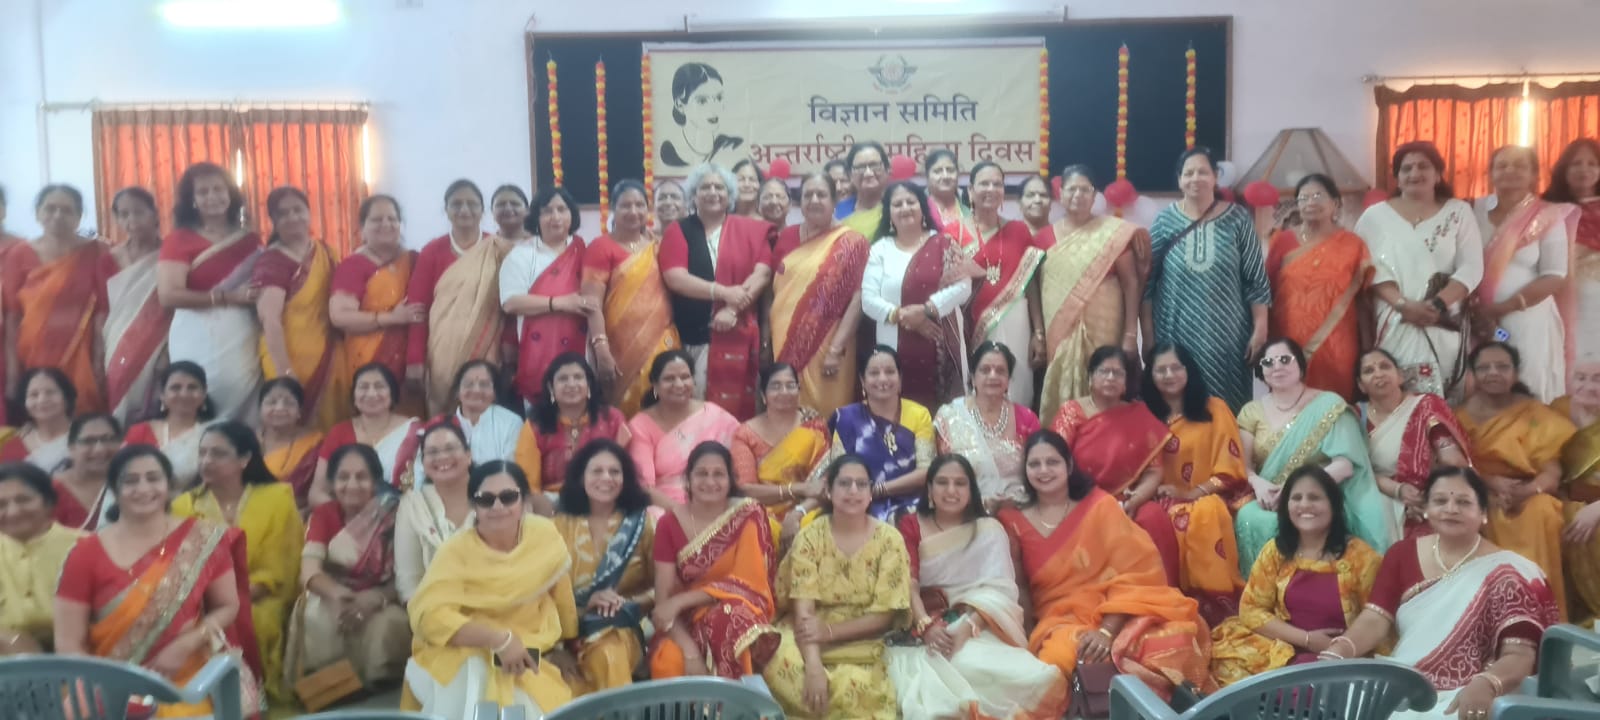 Women's Day and Holi Celebration with Enthusiasm in Women's Wings of Science Committee